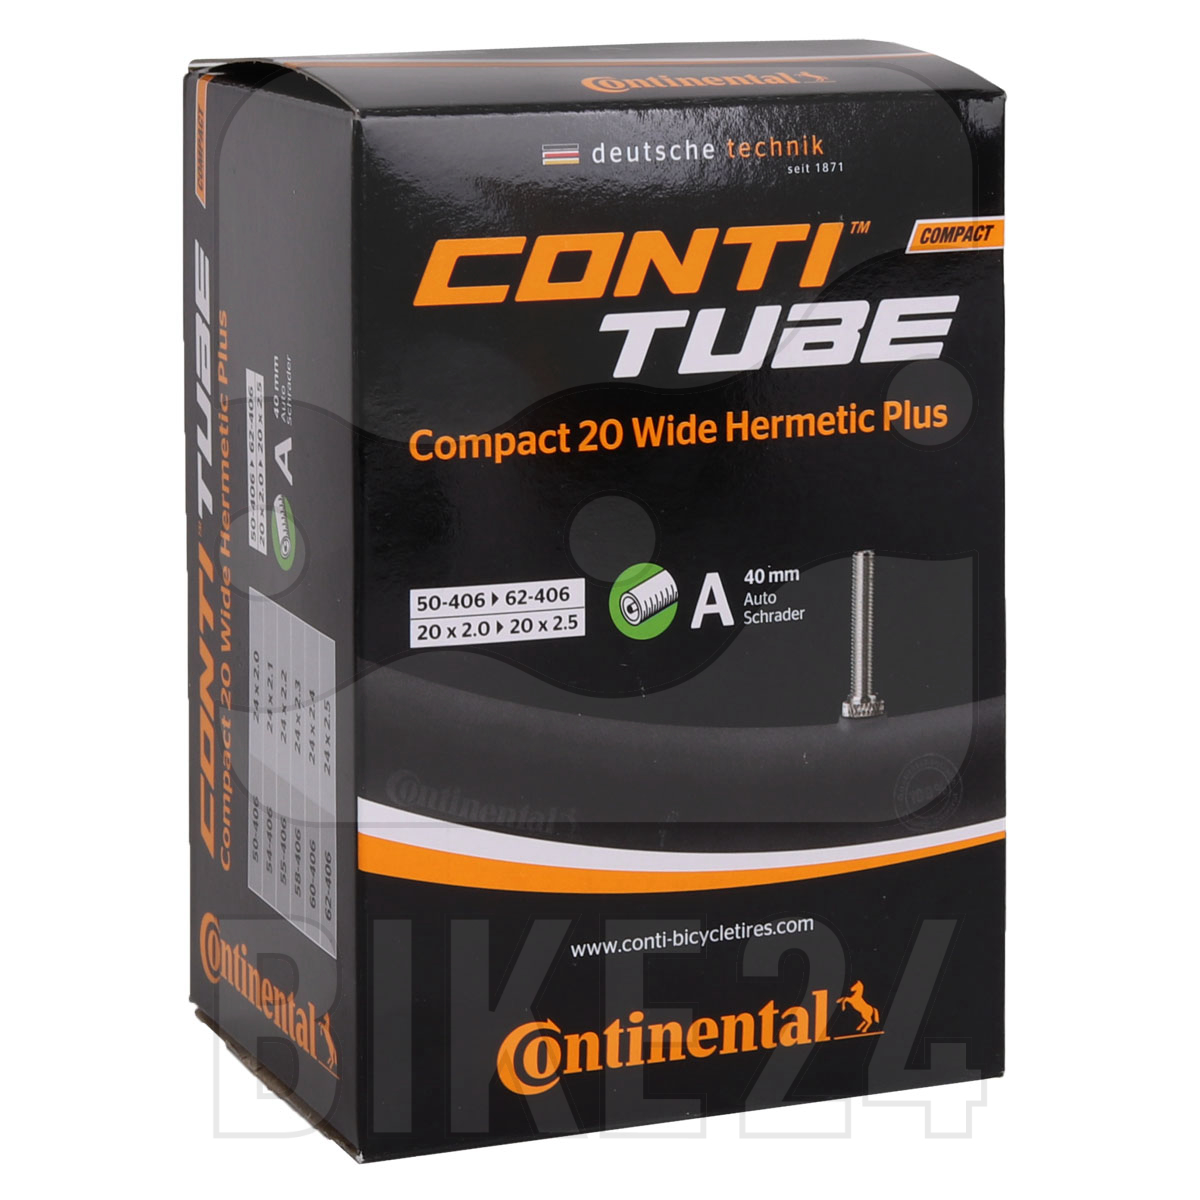 Image of Continental Compact 24 Wide Hermetic Plus Tube